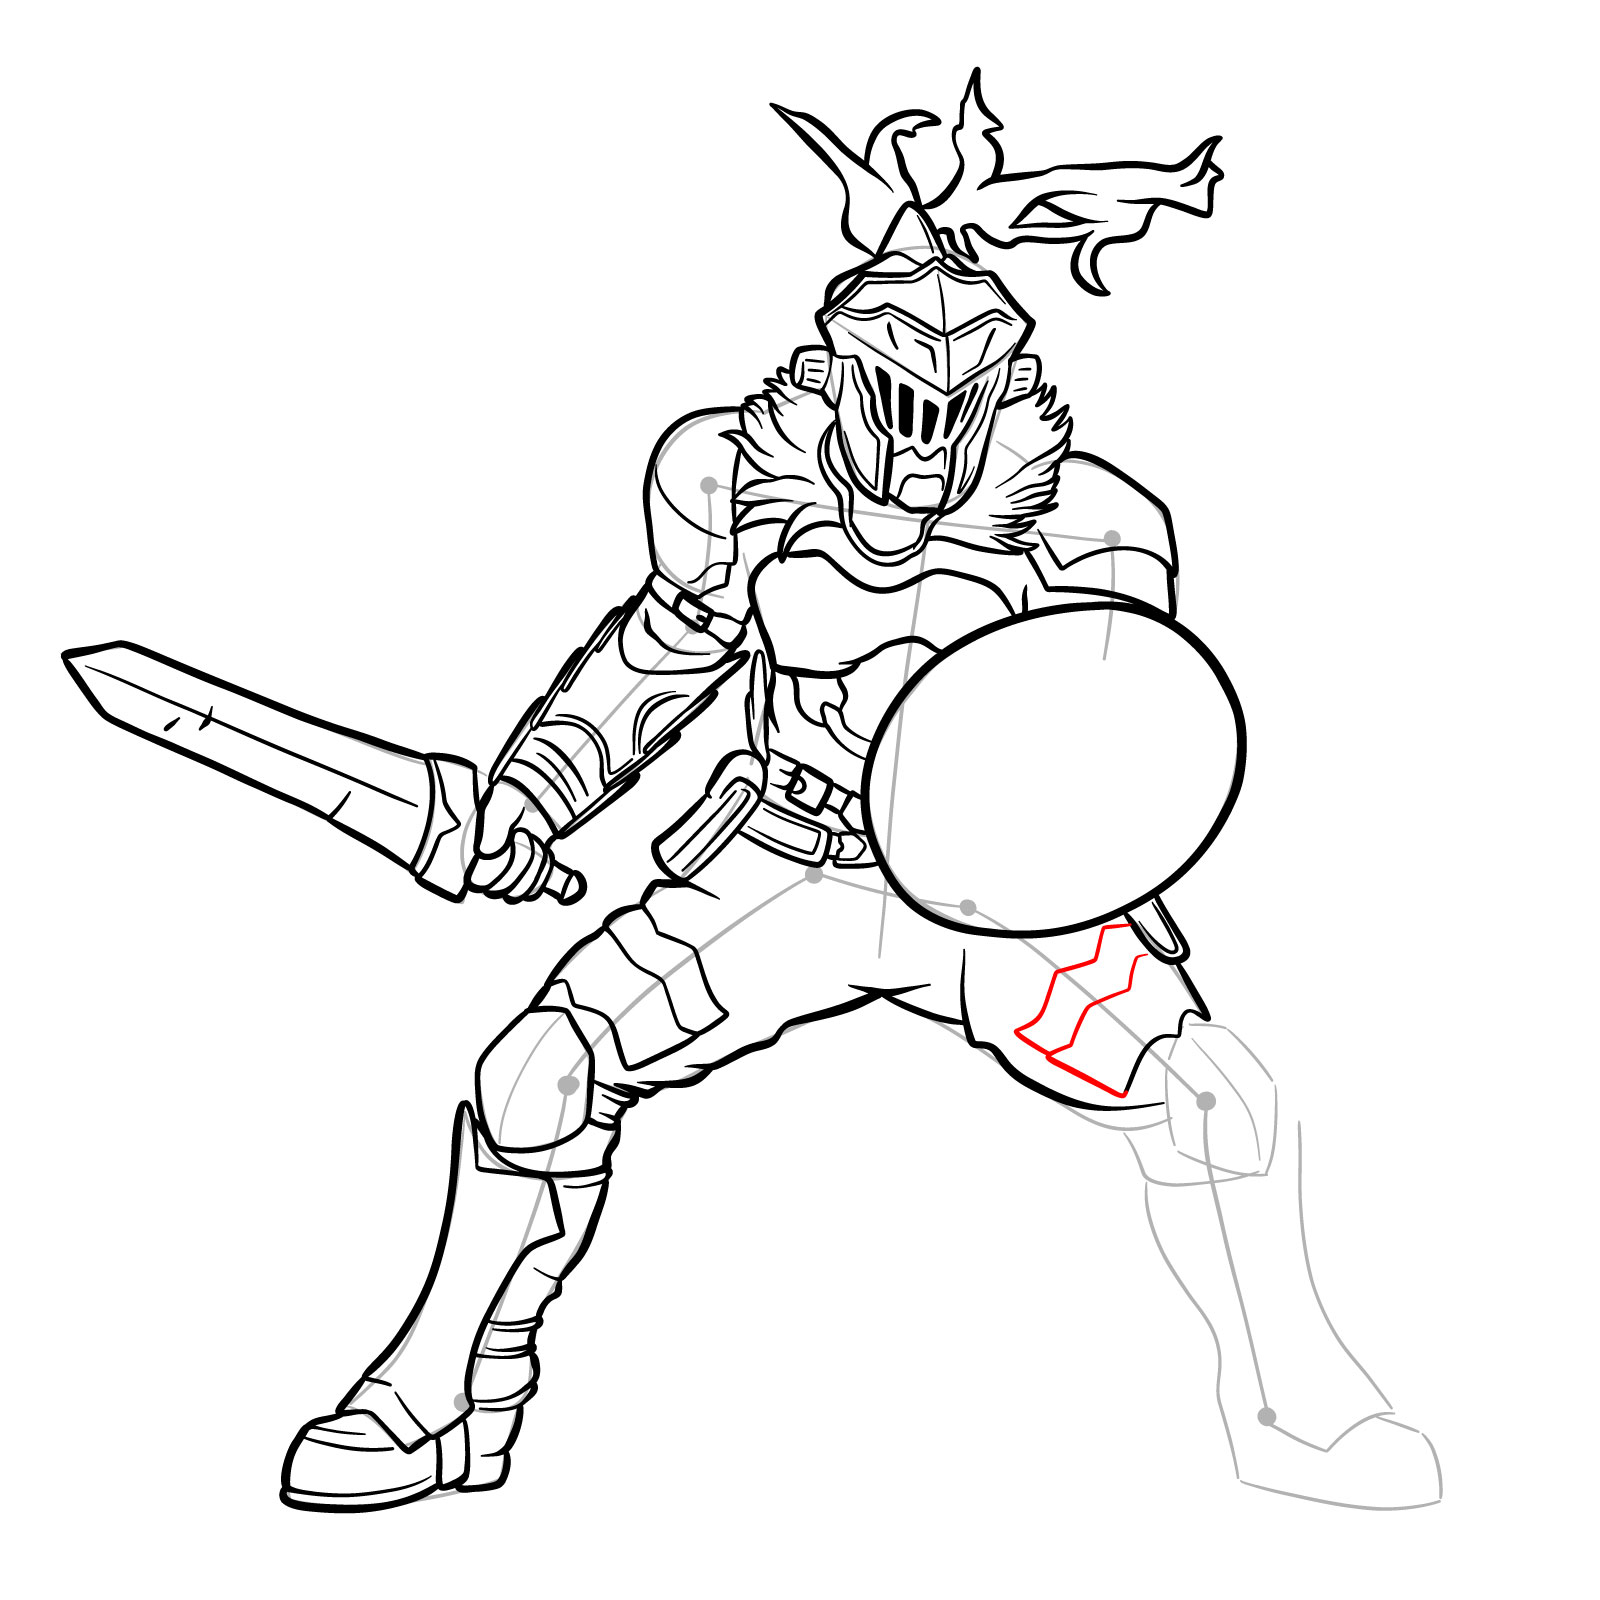 How to Draw Goblin Slayer in battle stance - step 33